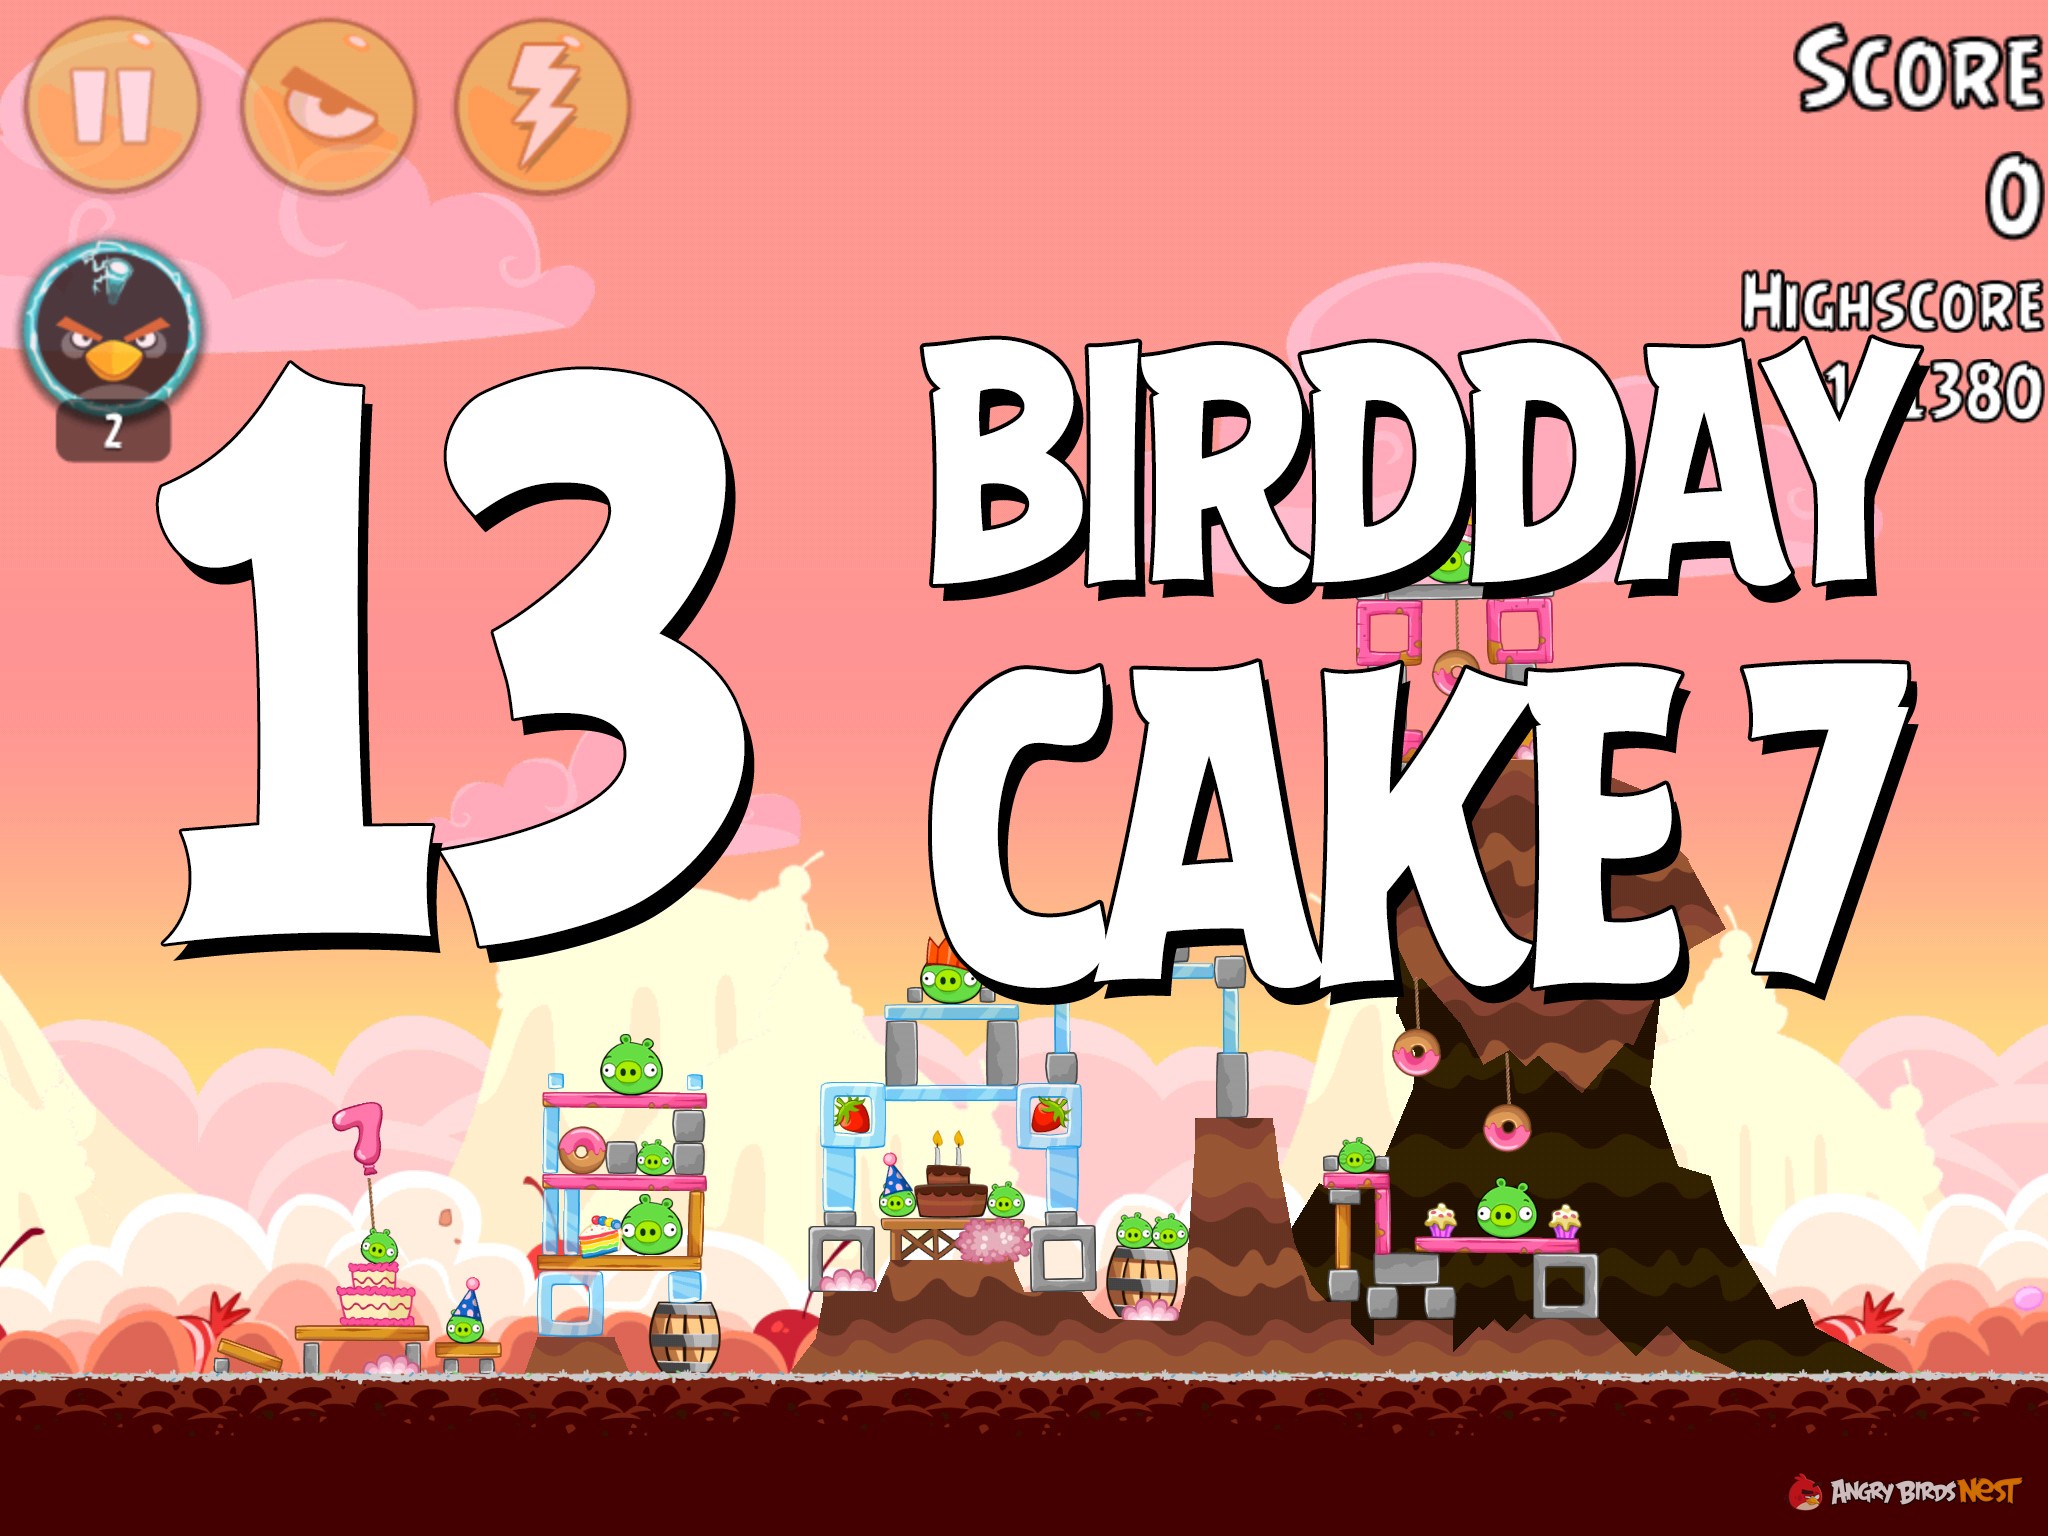 Angry-Birds-Birdday-Party-Cake-7-Level-13